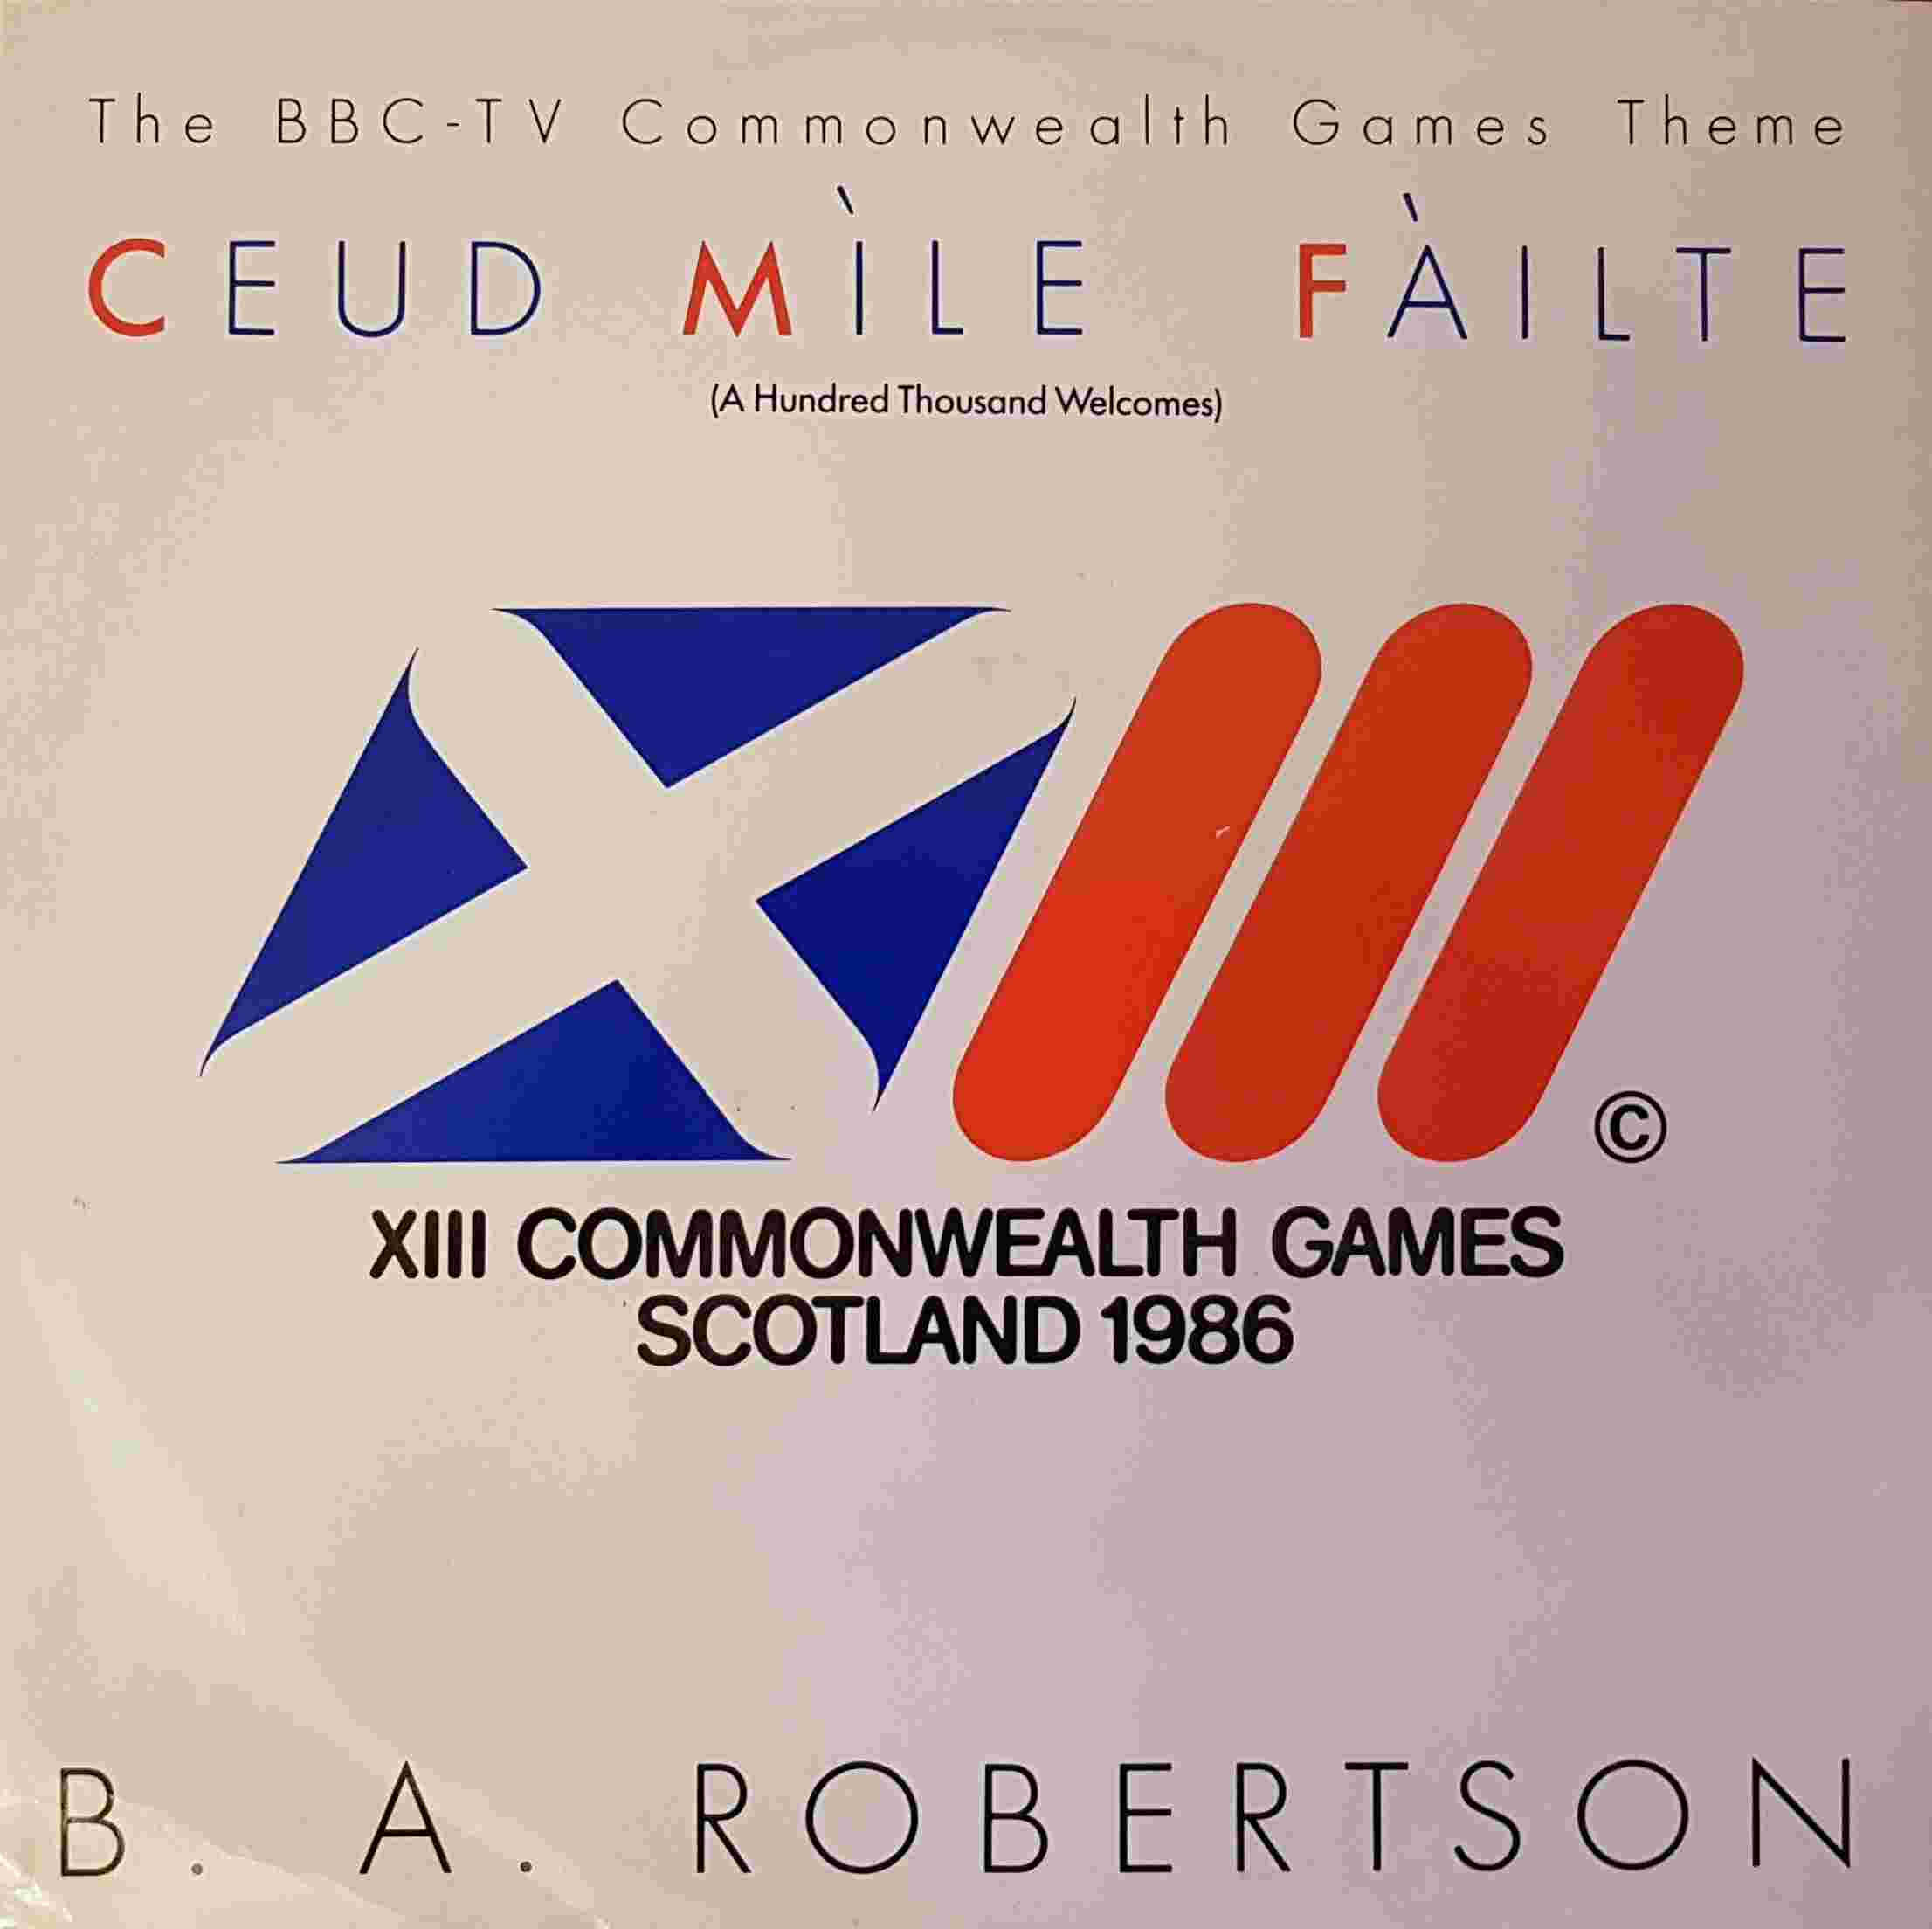 Picture of 12 RSL 192 Ceud mile failte (Commonwealth games '86) by artist B. A. Robertson from the BBC 12inches - Records and Tapes library